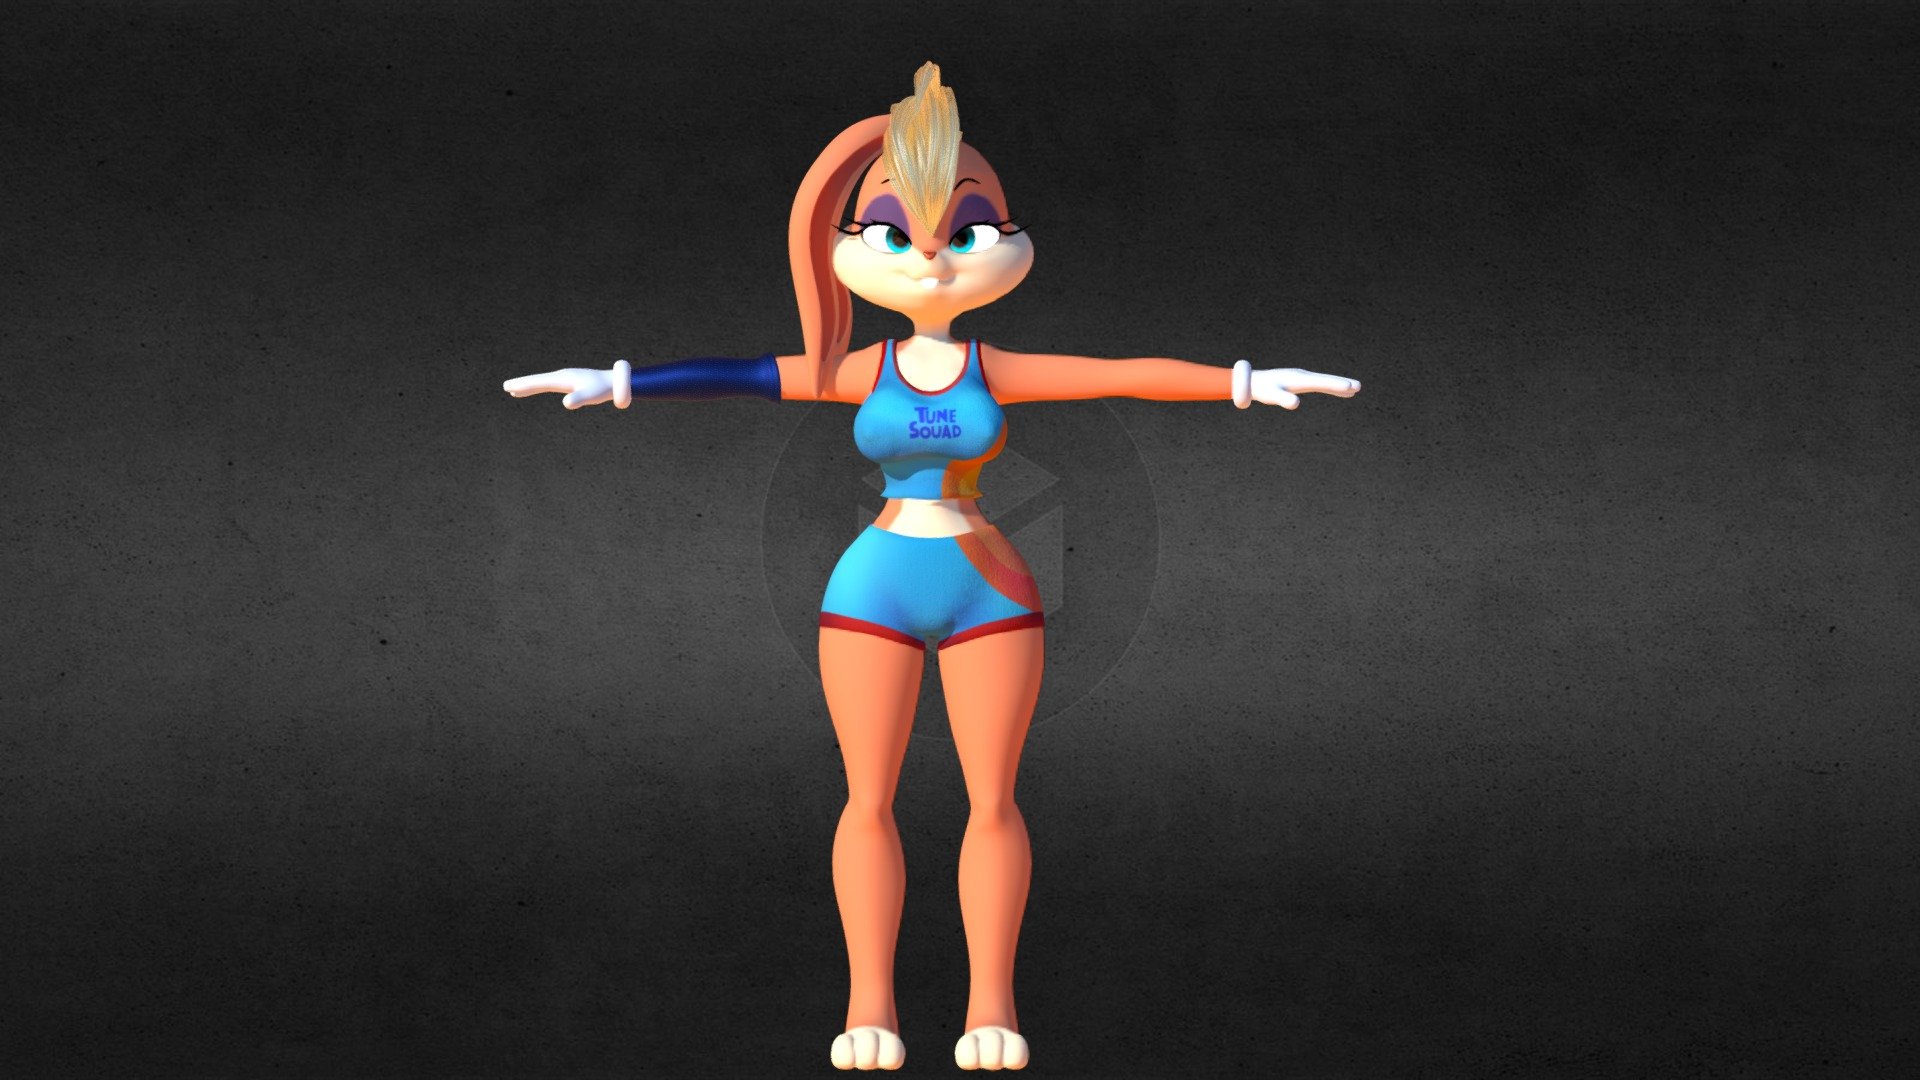 Ready for Vr chat ✔️
Blender file with rig ✔️
Full-fledged model ✔️
Free download here:
terraxy gumroad - LBKRU (copy this and find my gumroad in the search engine) - Lola The Bunny | Free - Download Free 3D model by Teva (@TerrAxy) 3d model